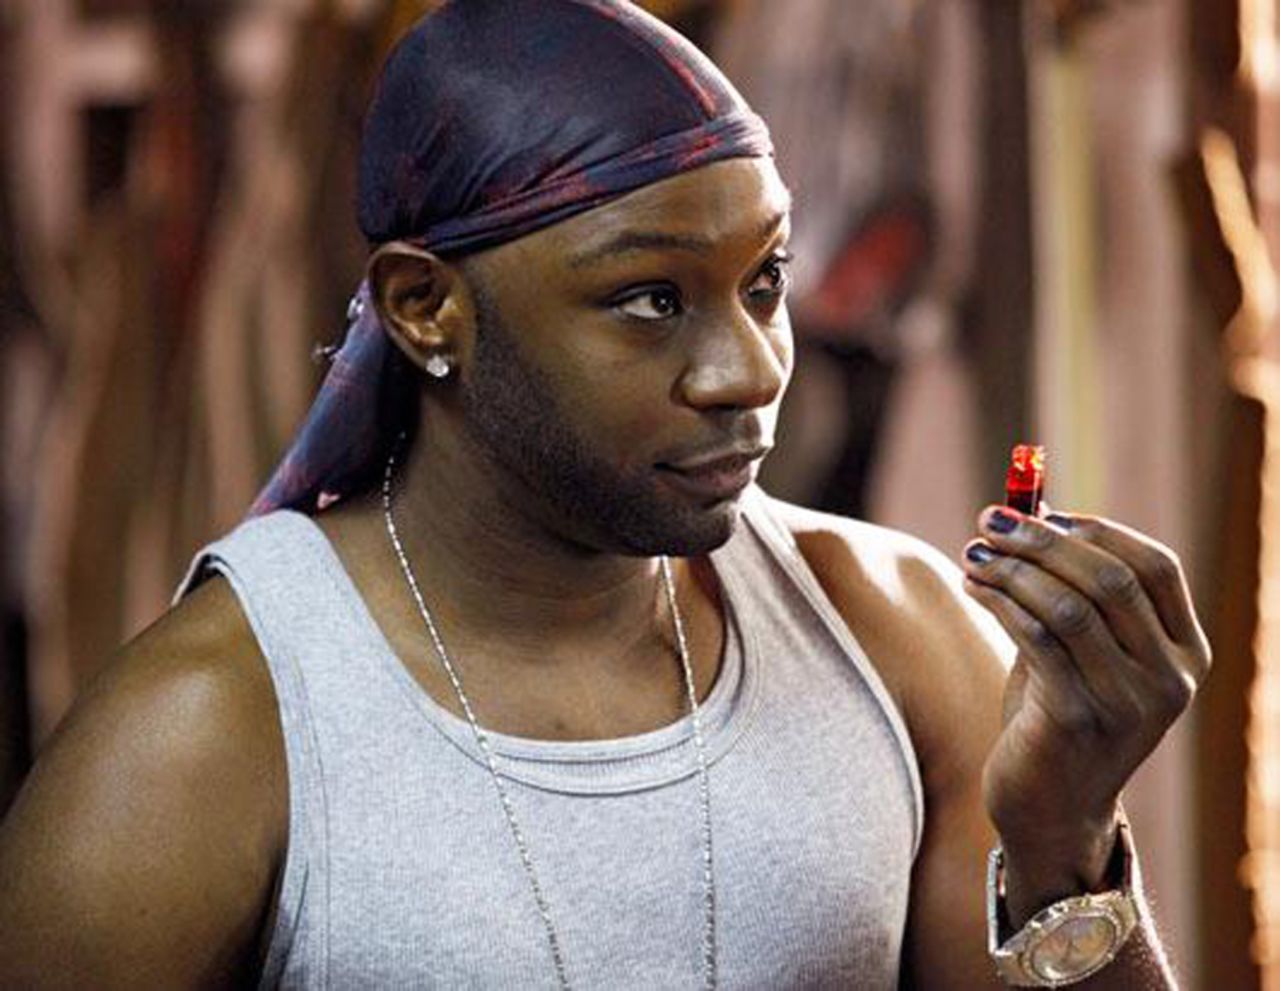 Lafayette Reynolds, played by Nelsan Ellis, worked as a cook and gay prostitute on the HBO series "True Blood."